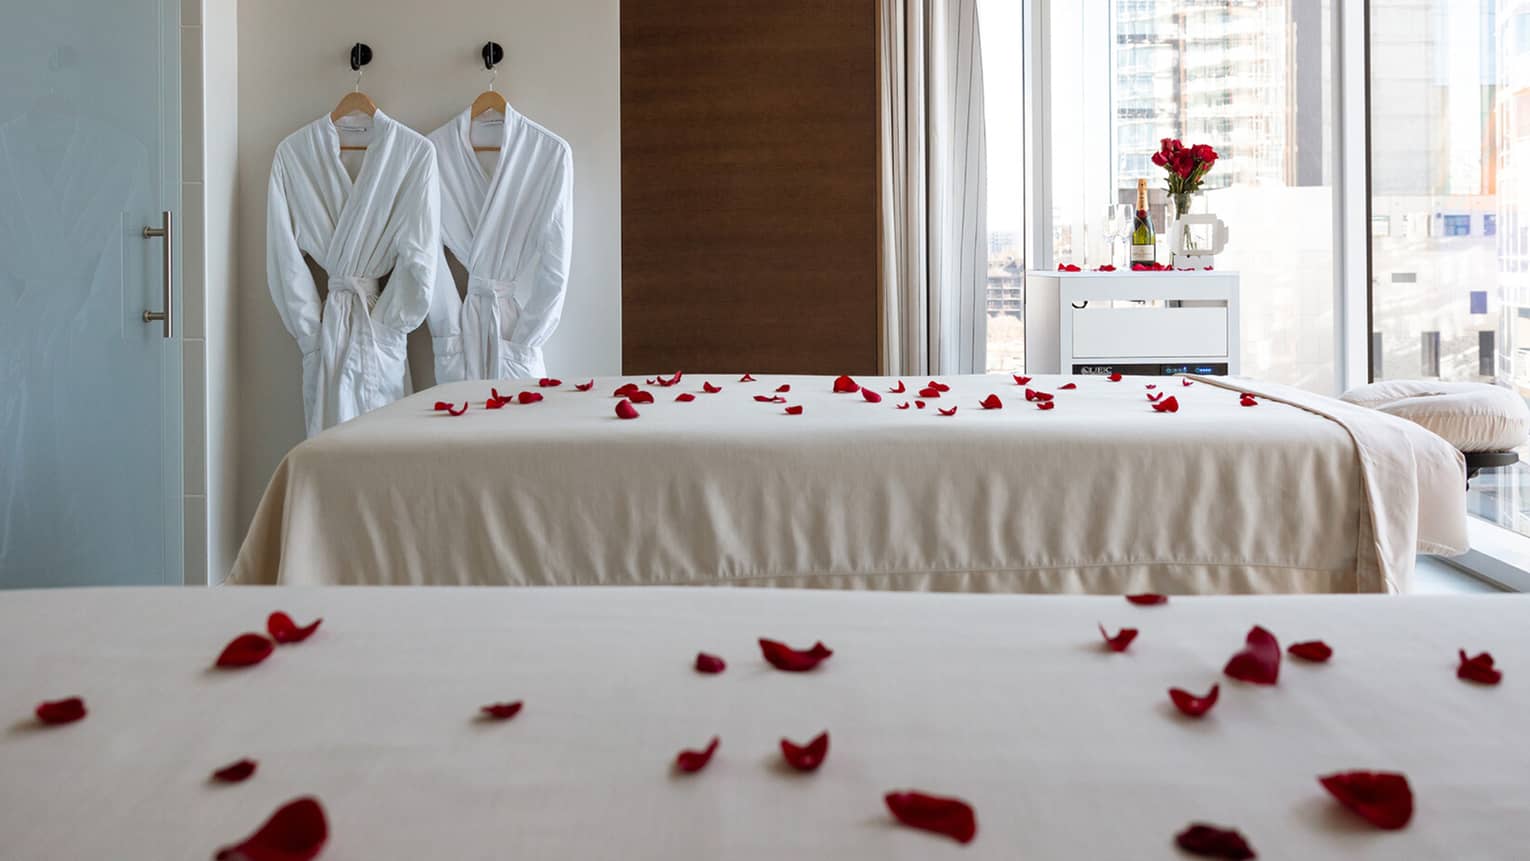 Two spa beds topped with red rose petals overlooking a city view, two bath robes hanging on the wall behind, and a table with champagne and a bouquet of roses